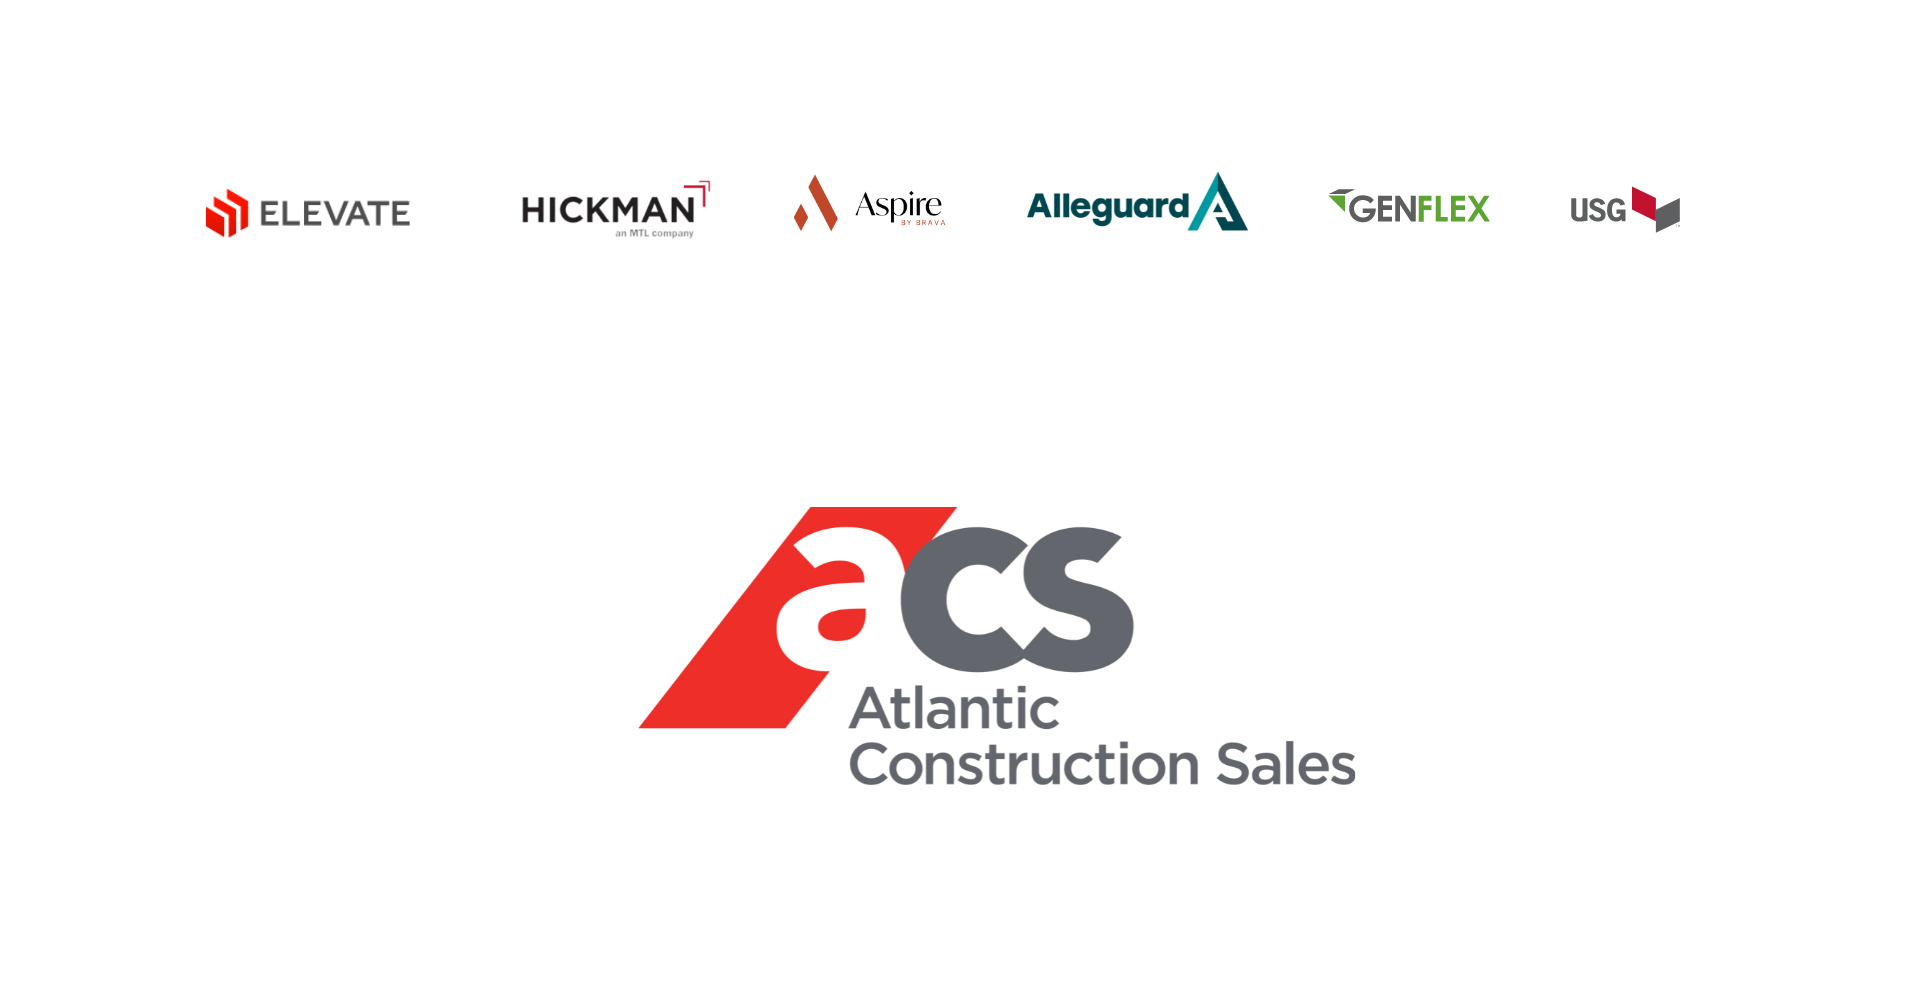 The acs atlantic construction sales logo is on a white background.